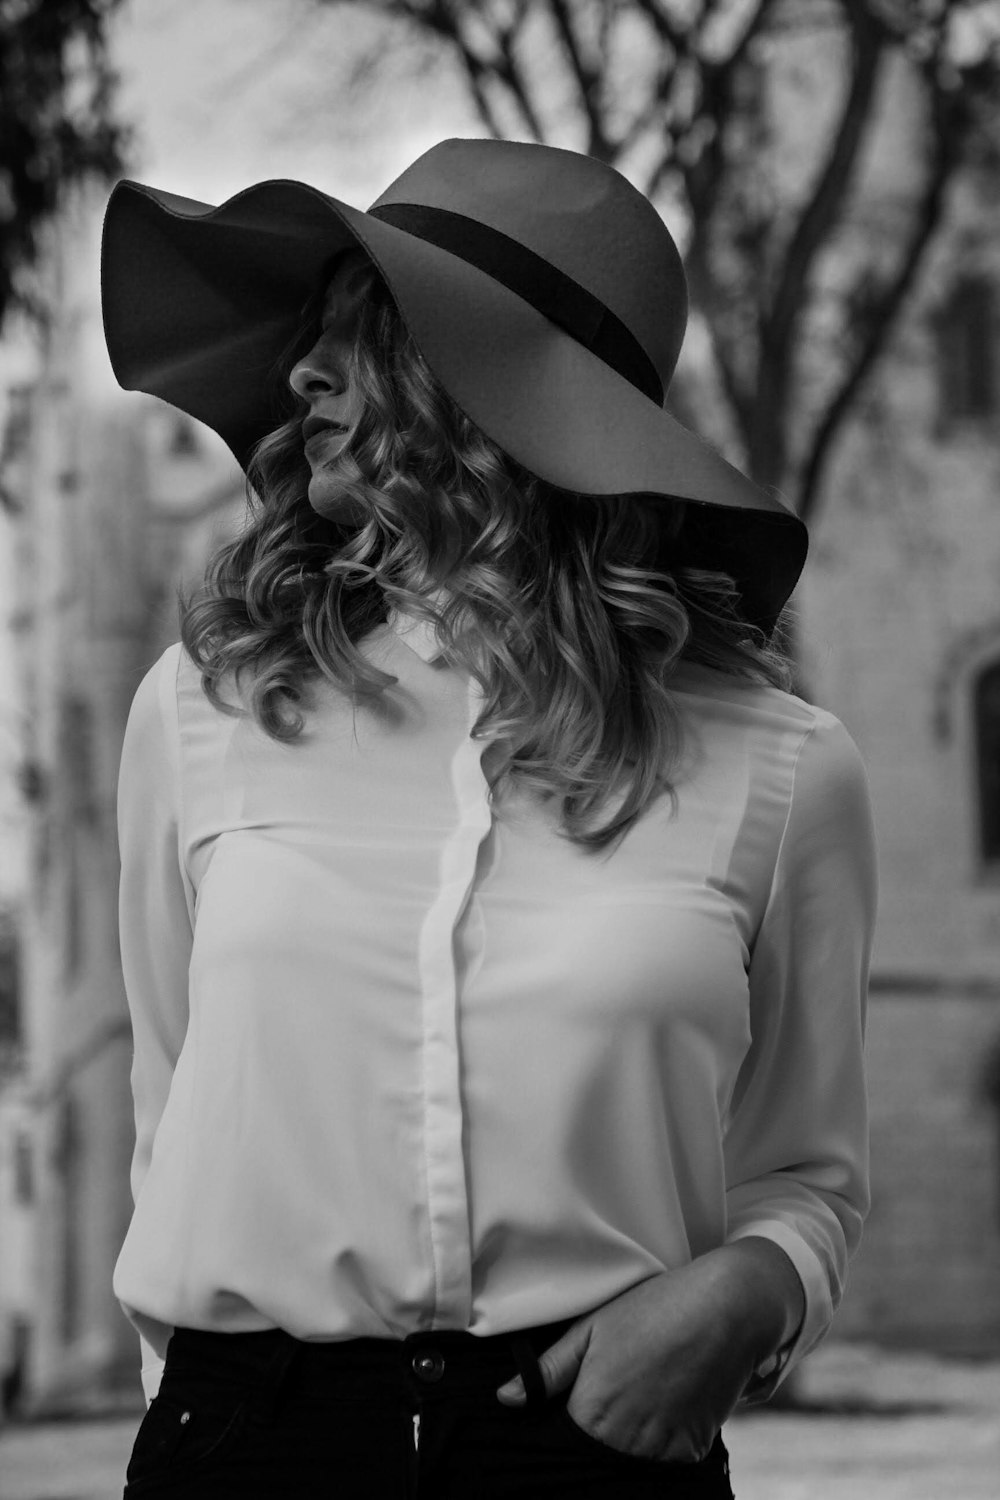 grayscale photo of woman wearing hat and long sleeve shirt